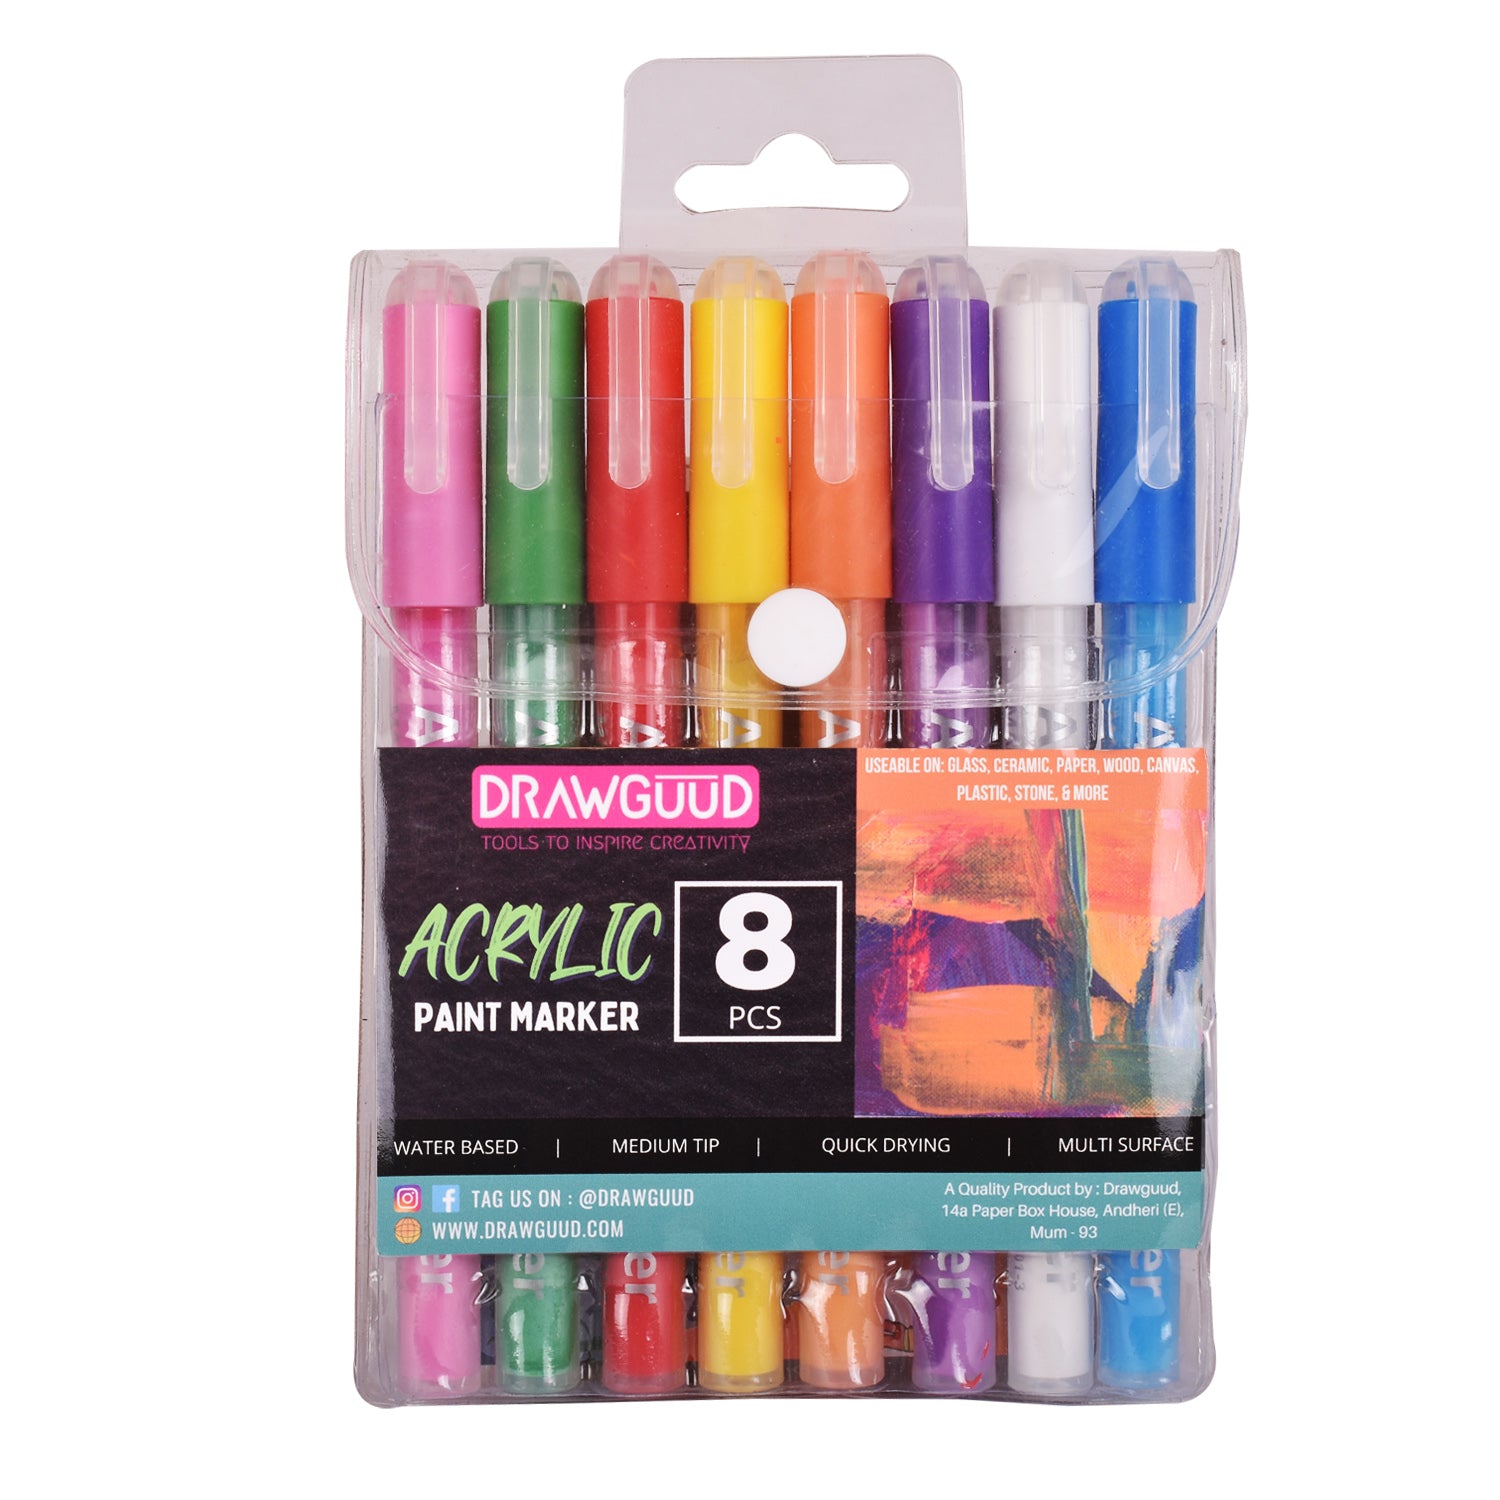 15 Acrylic Paint Pens extra-fine Tip for Rock Painting, Stone